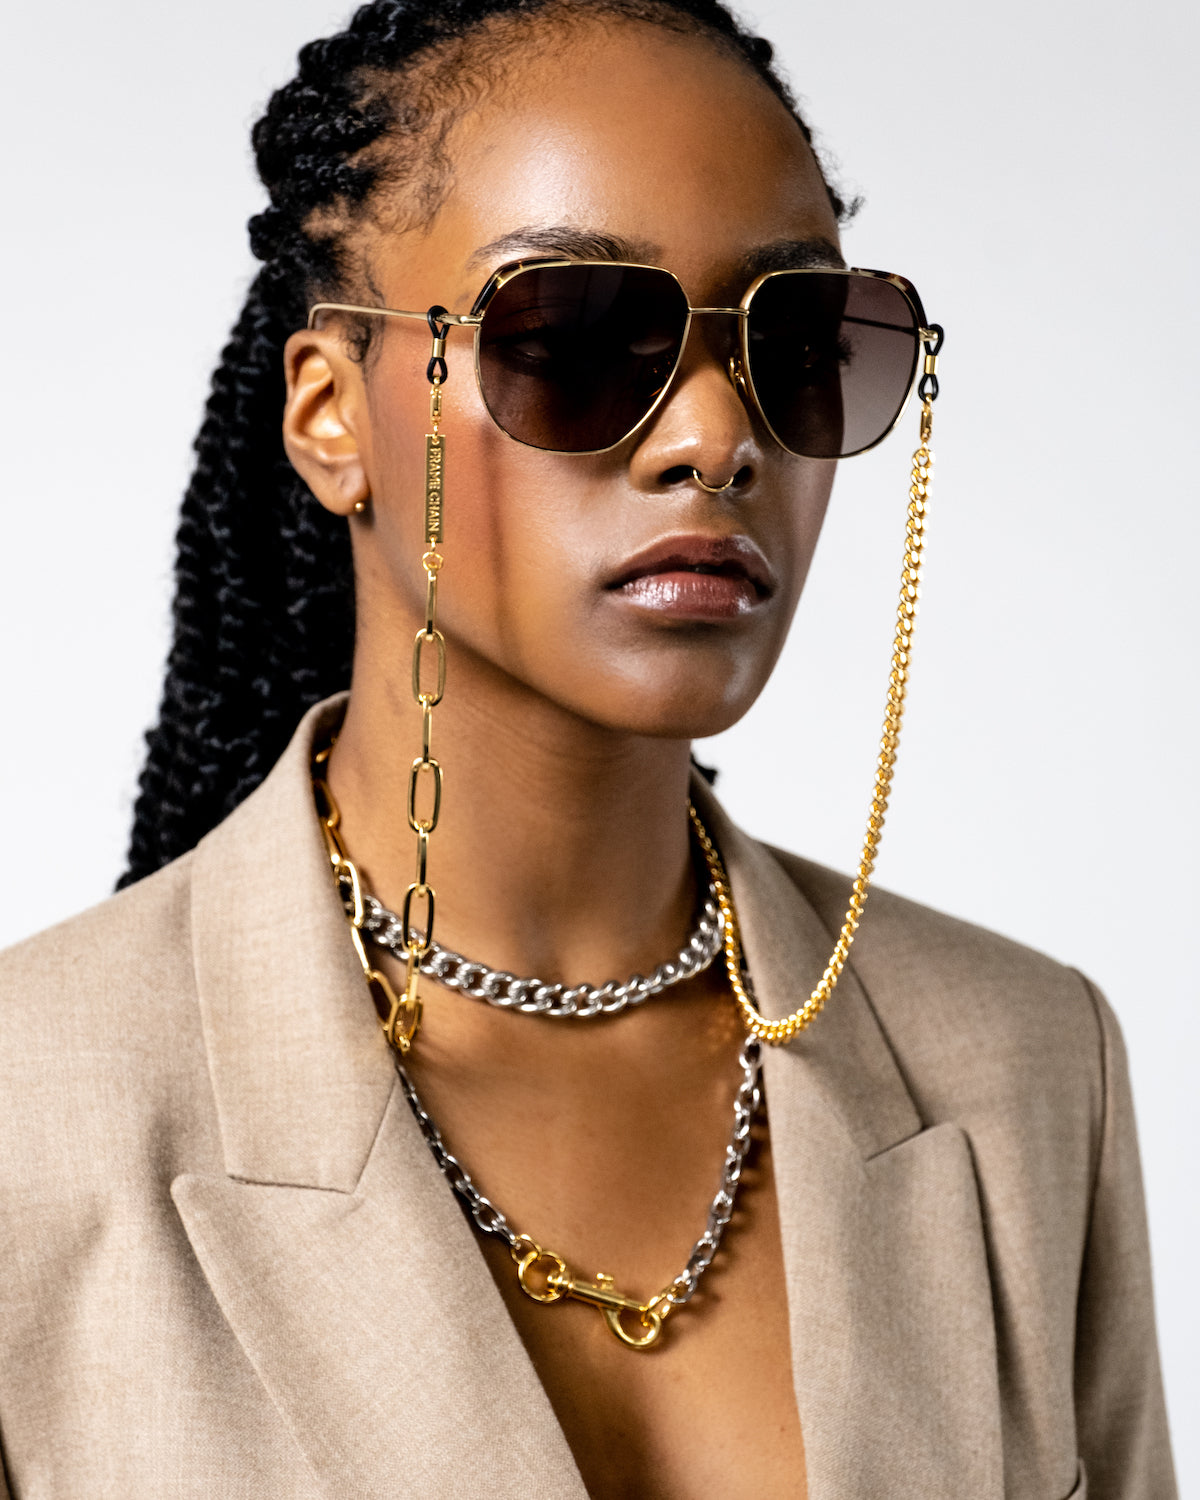 FRAME CHAIN | Glasses Chains | GET LOCKY in YELLOW AND WHITE GOLD